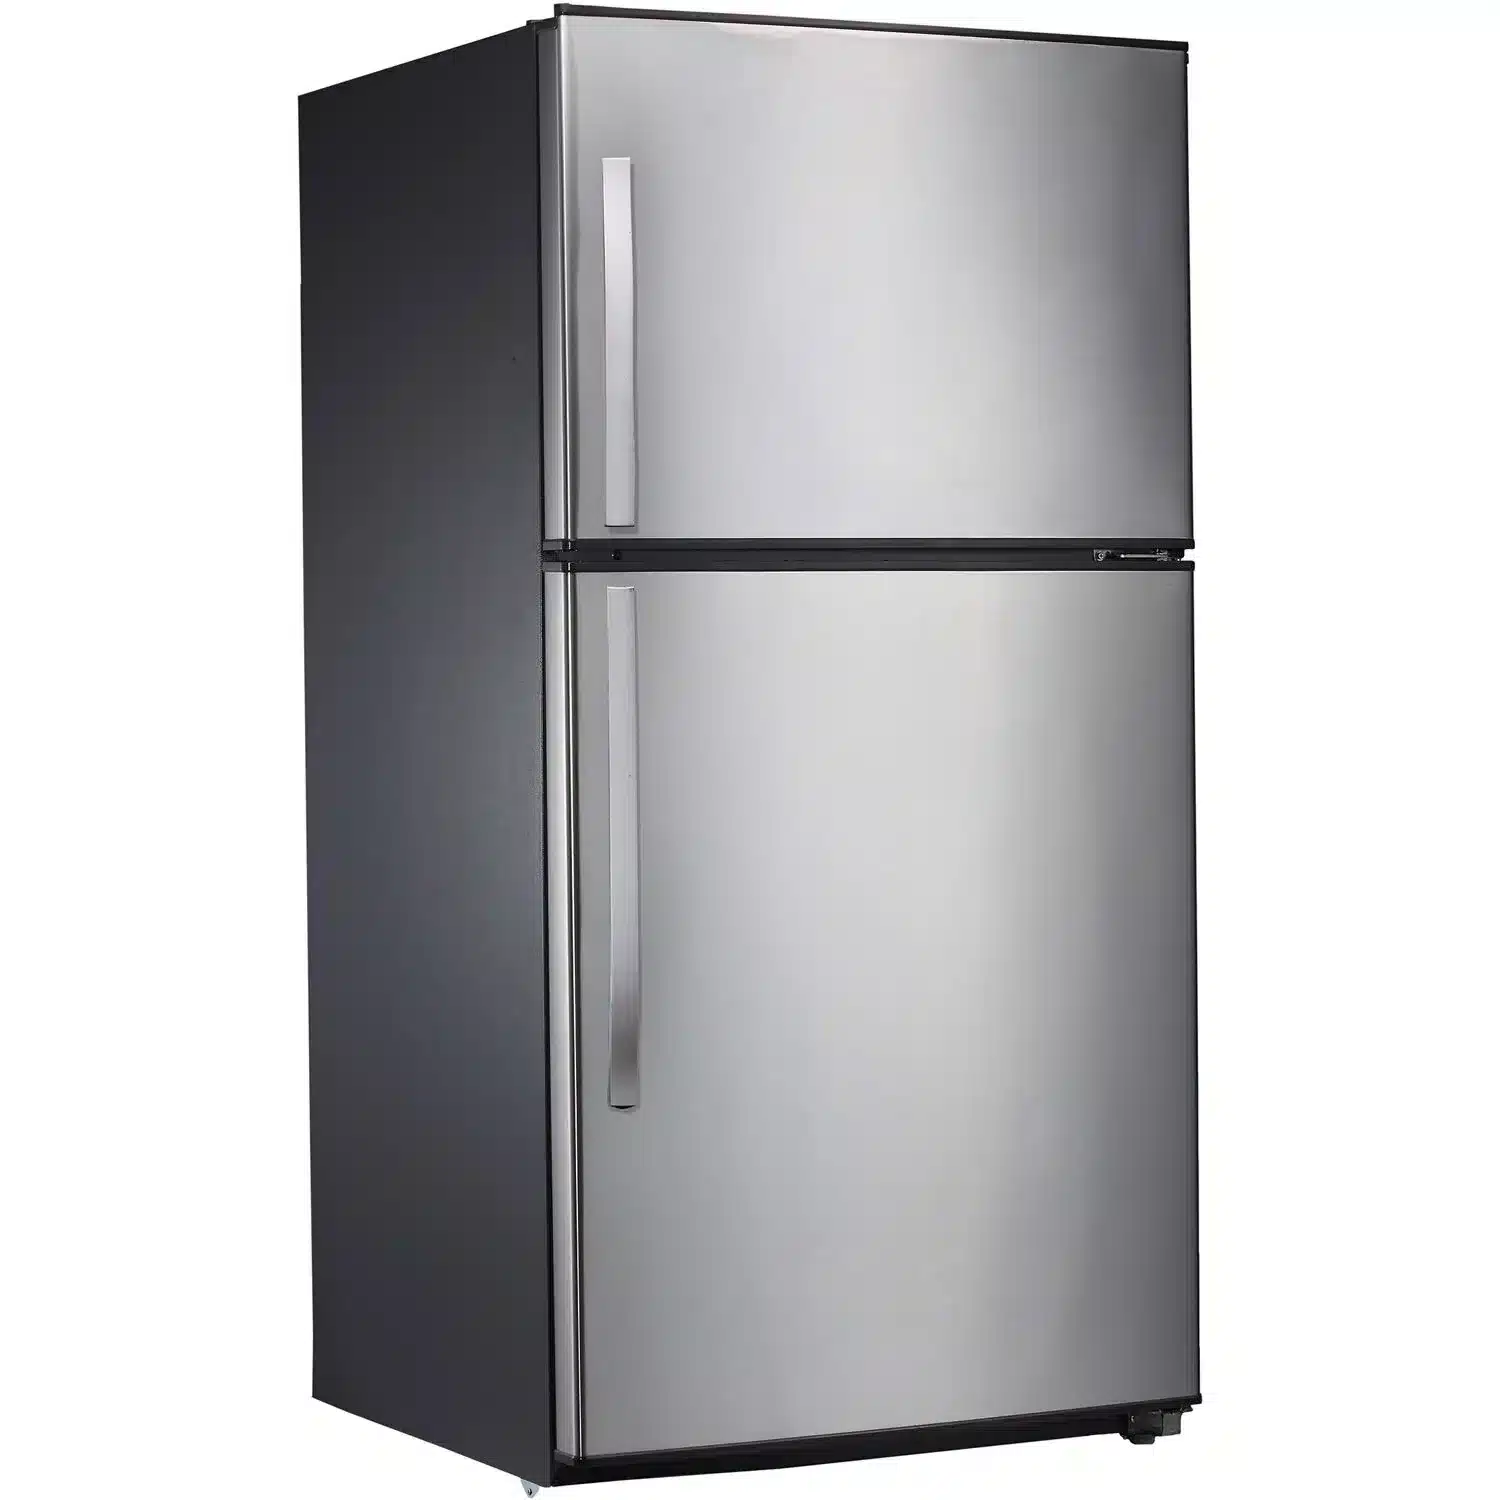 is-midea-a-good-refrigerator-brand-how-does-it-compare